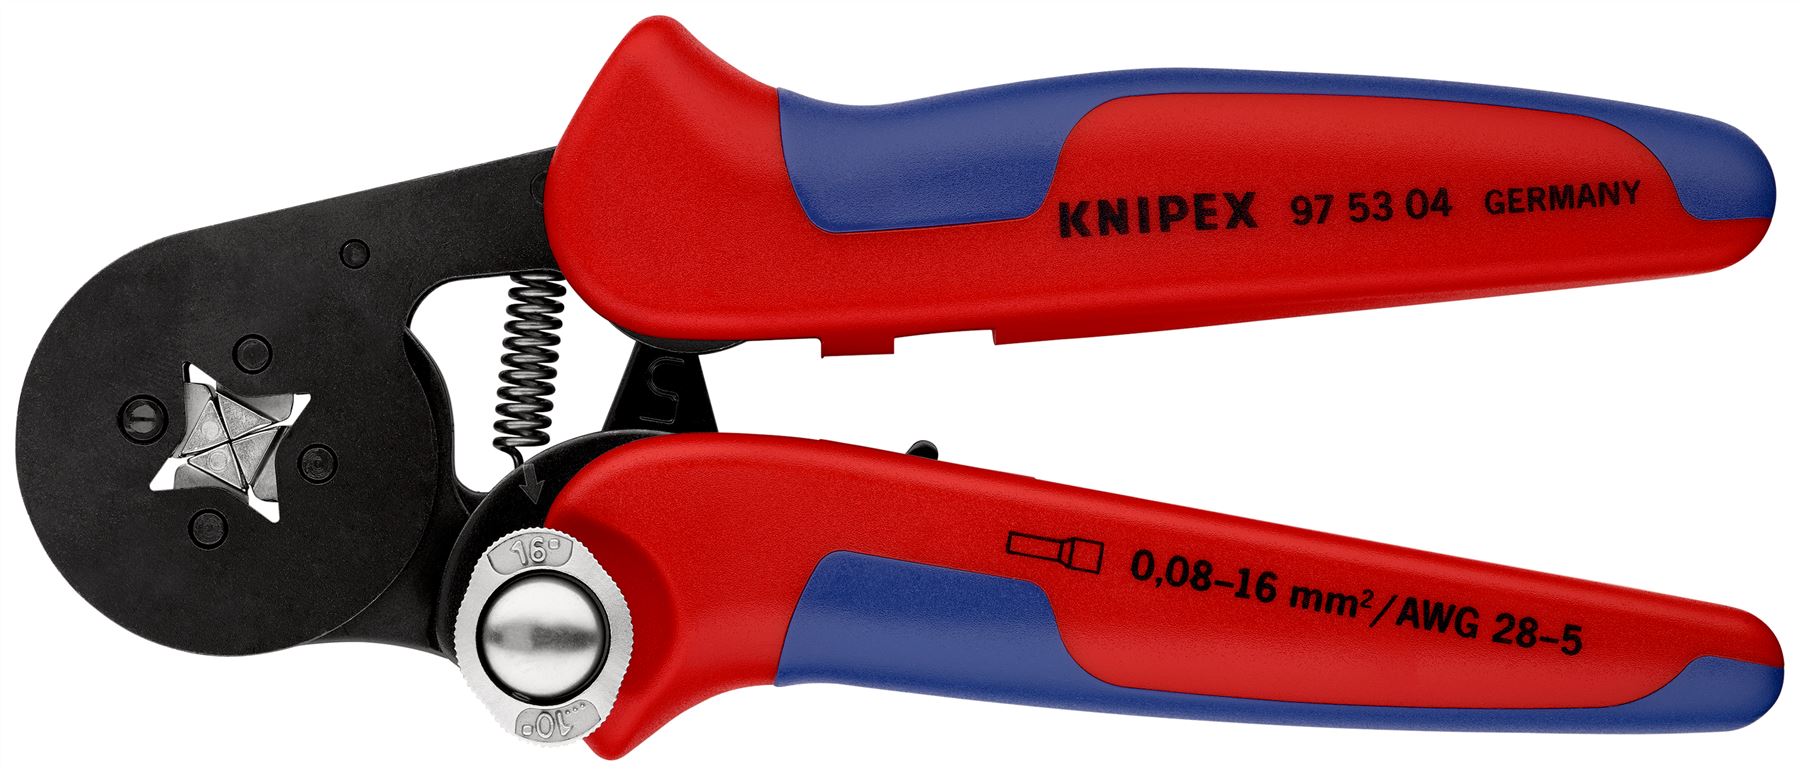 KNIPEX Self Adjusting Crimping Pliers for Wire Ferrules with Lateral Access 0.08-16mm² 180mm Multi Component Grips 97 53 04